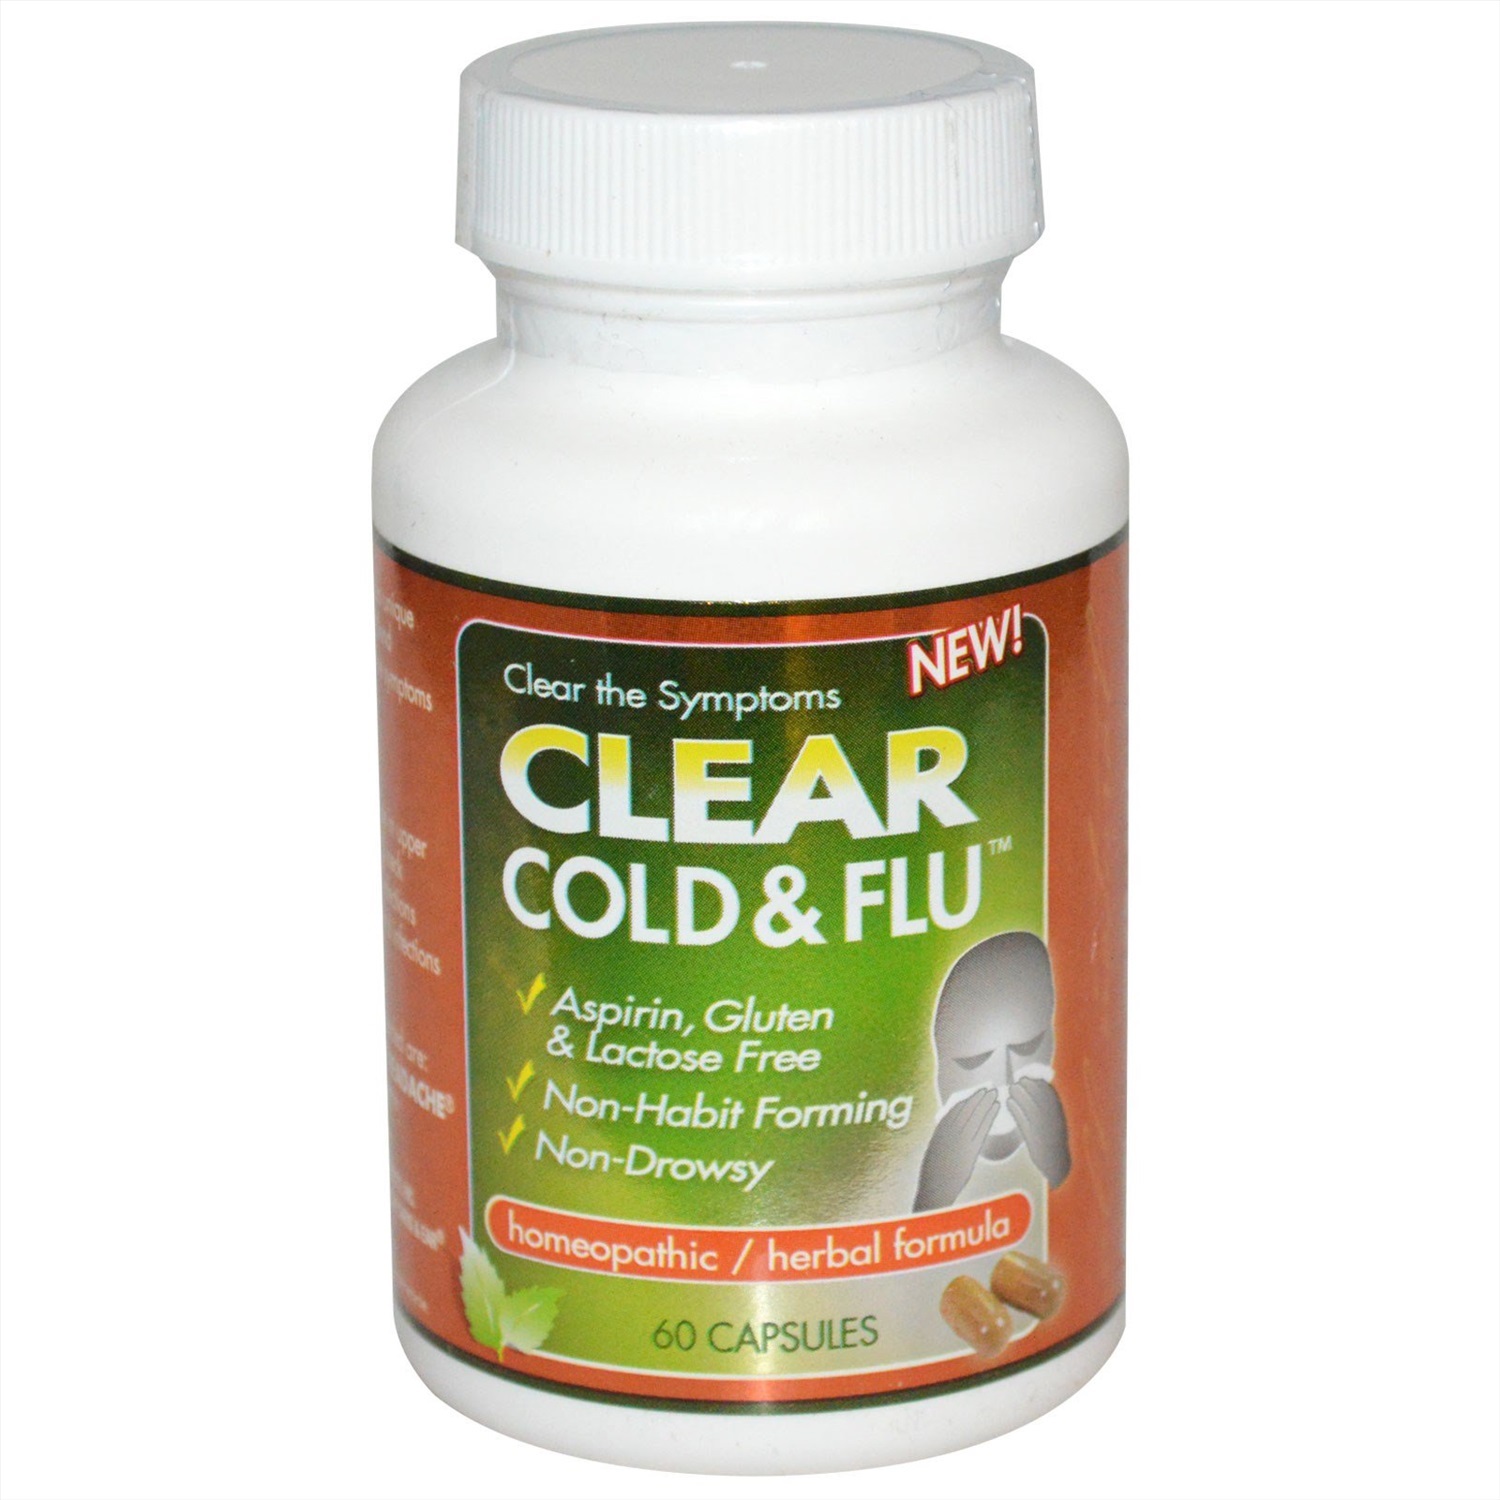 Клеар колд. Clear products. NOFLU препарат. Best Clear product. Clear cold